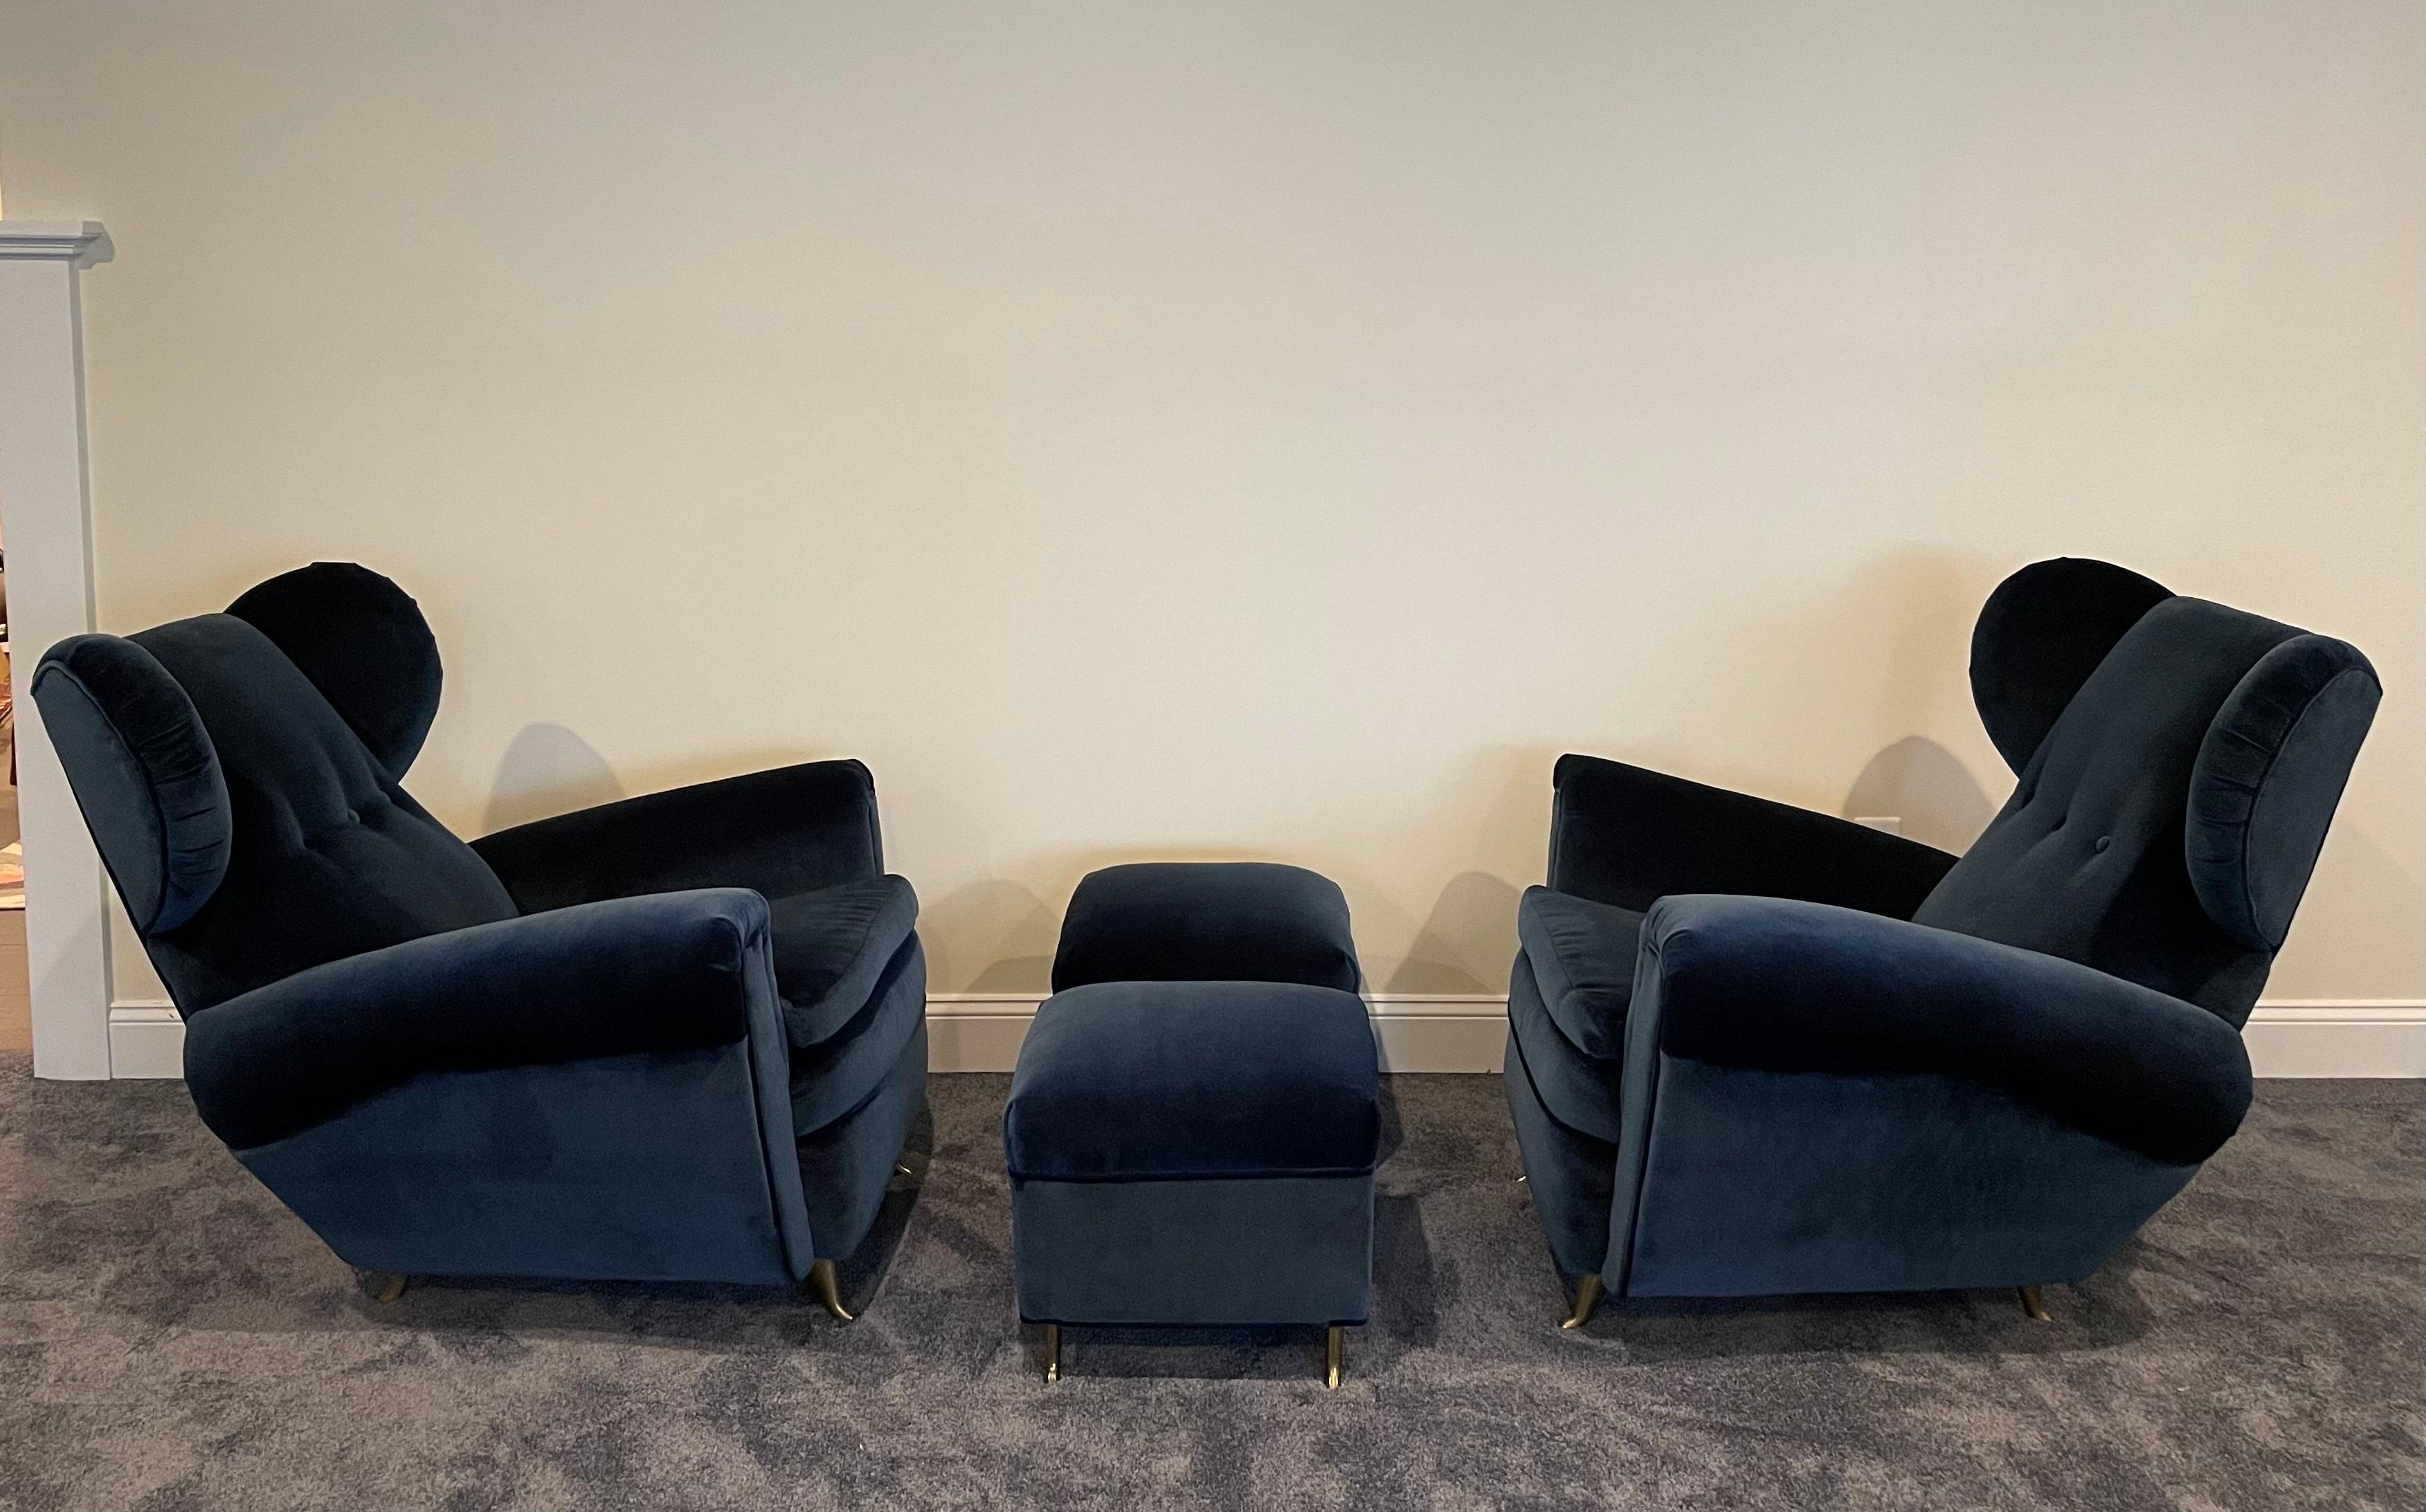 Incredible pair of mid-century Italian wingback chairs originally purchased from Donzella and newly upholstered in deep blue mohair with matching ottomans. Chairs are as comfortable as they are elegant. All legs are hand-casted and solid brass.